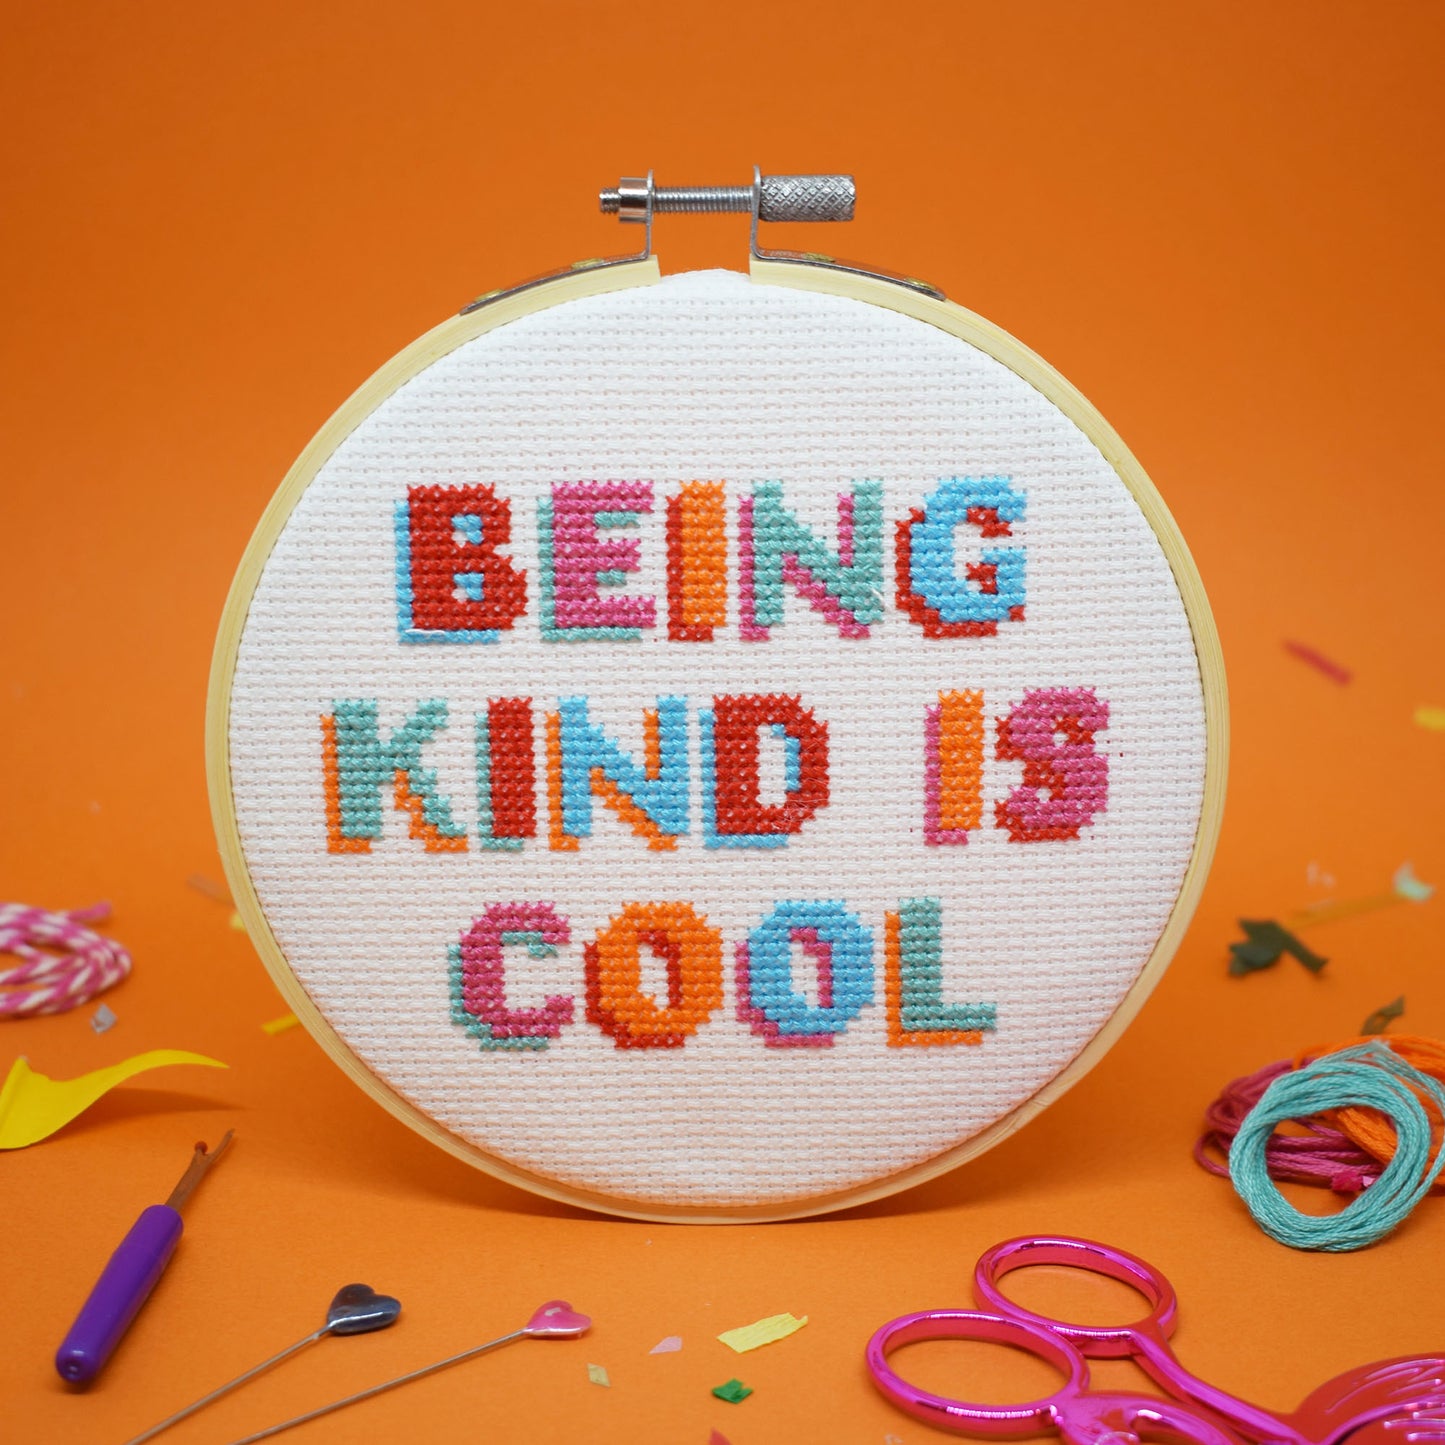 'Being Kind is Cool' Large Cross Stitch Kit